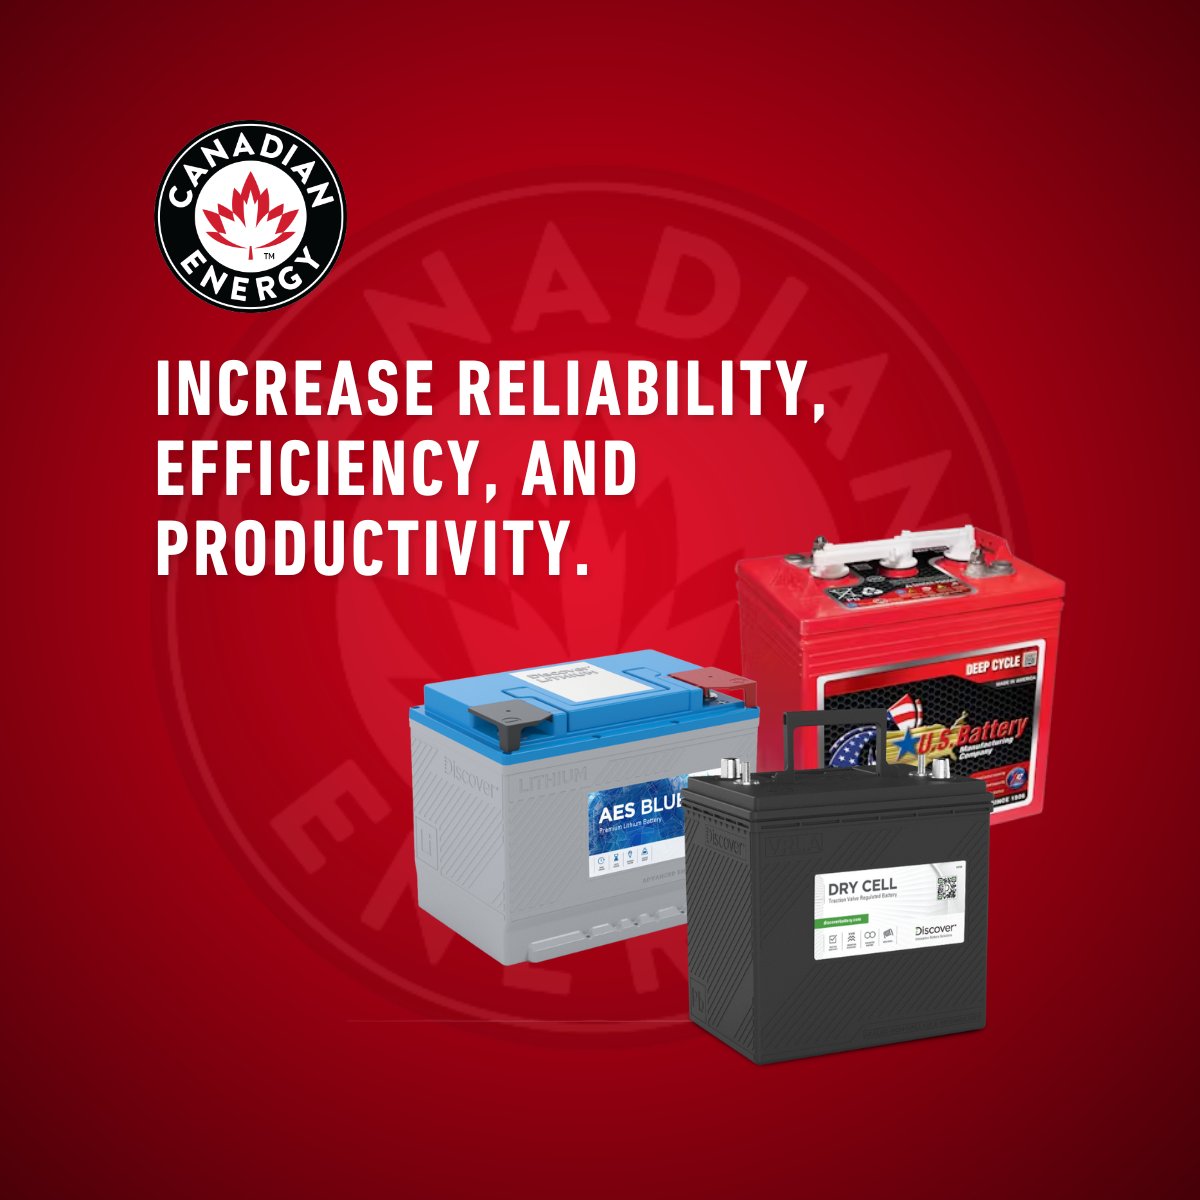 Check out Canadian Energy's industrial grade battery solutions for increased reliability, efficiency, and cost savings! Visit the link for more info. bit.ly/3J6mGdR #deepcycle #scrubberbattery